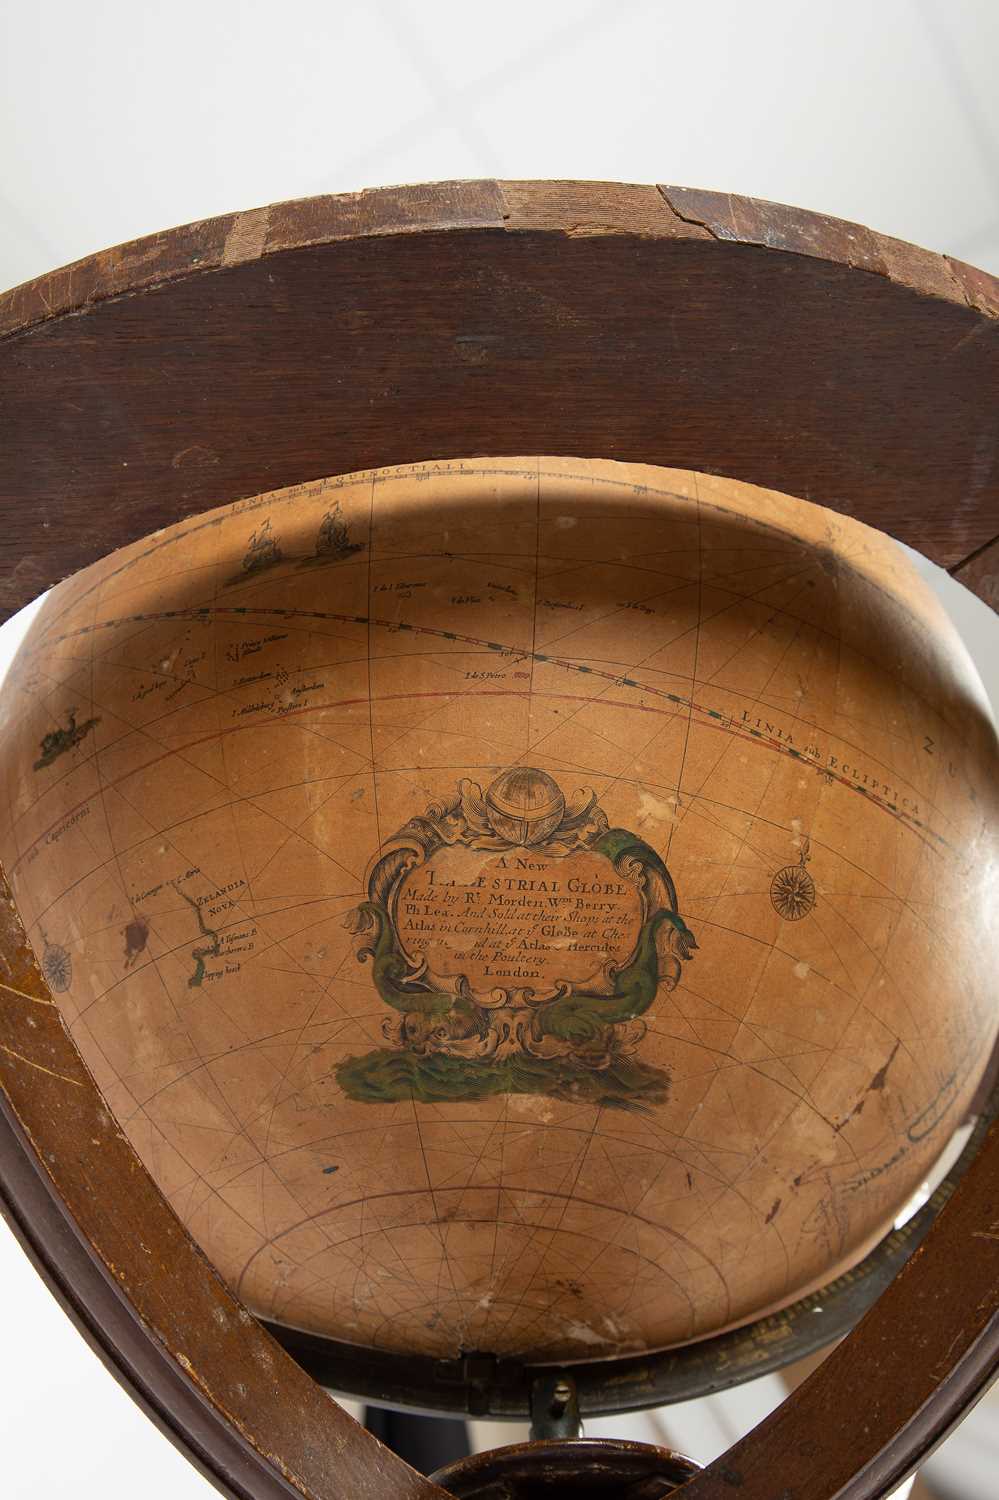 A RARE CHARLES II 14 INCH TERRESTRIAL GLOBE BY ROBERT MORDEN, WILLIAM BERRY AND PHILIP LEA, - Image 2 of 3